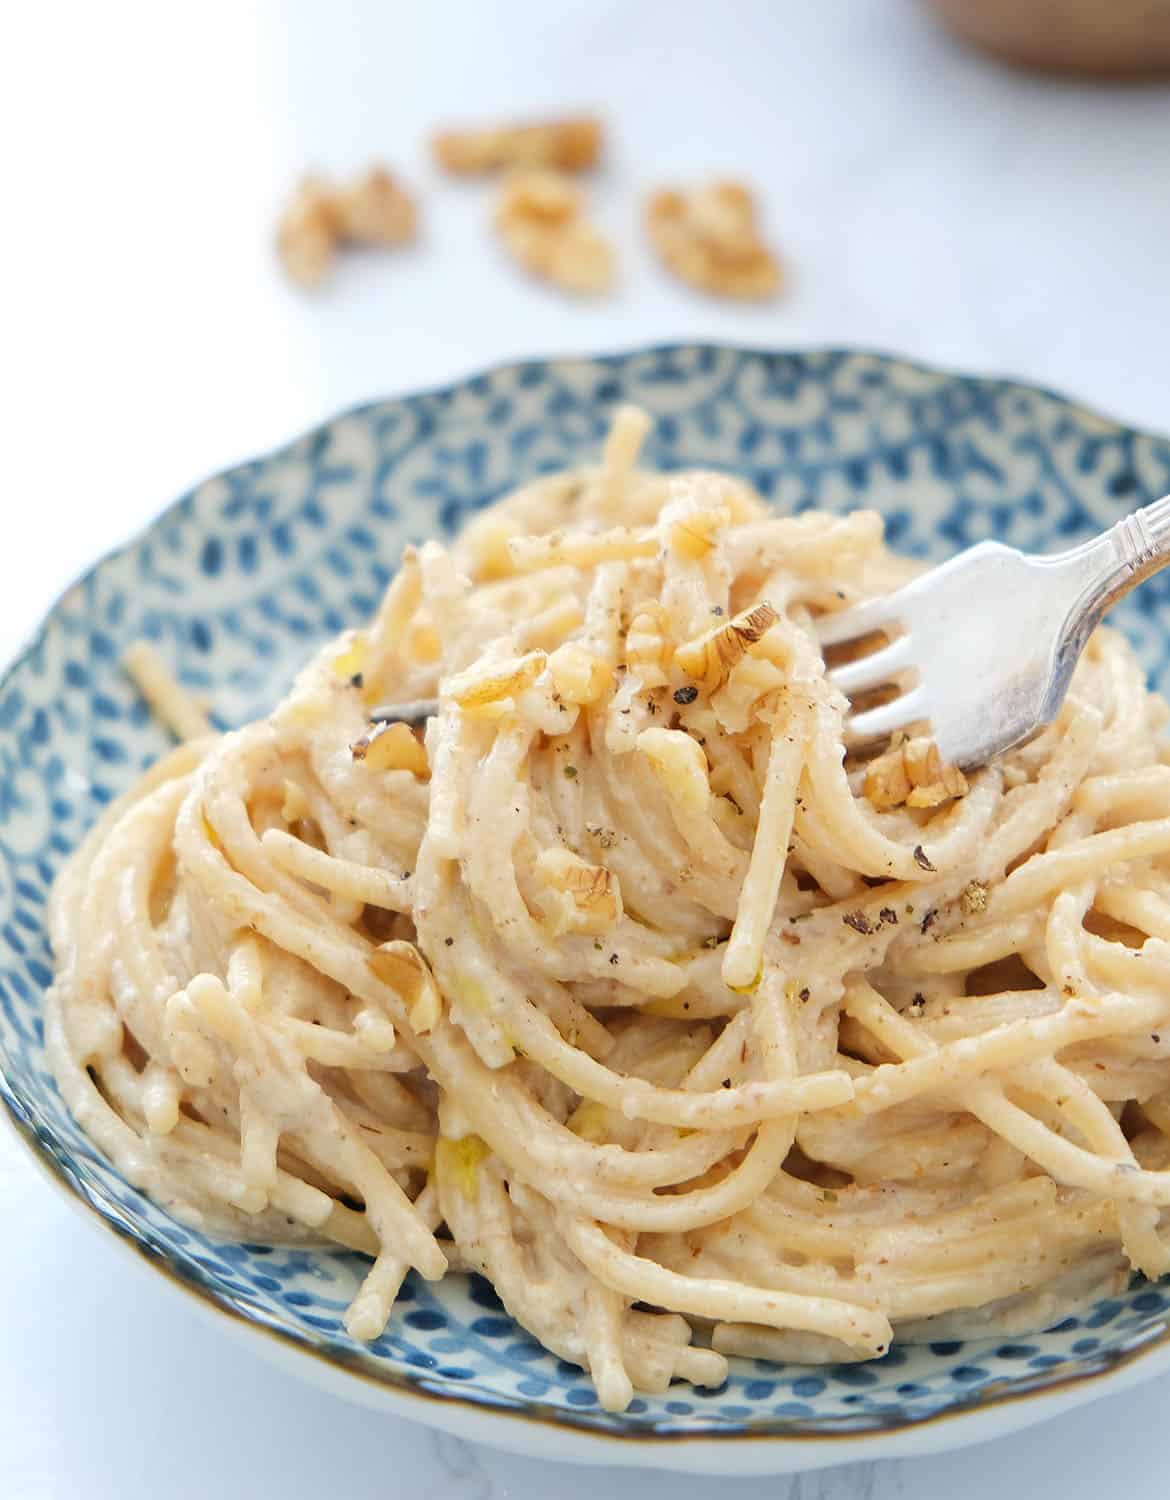 A fork is lifting some spaghetti with walnut sauce served in a blue bowl.